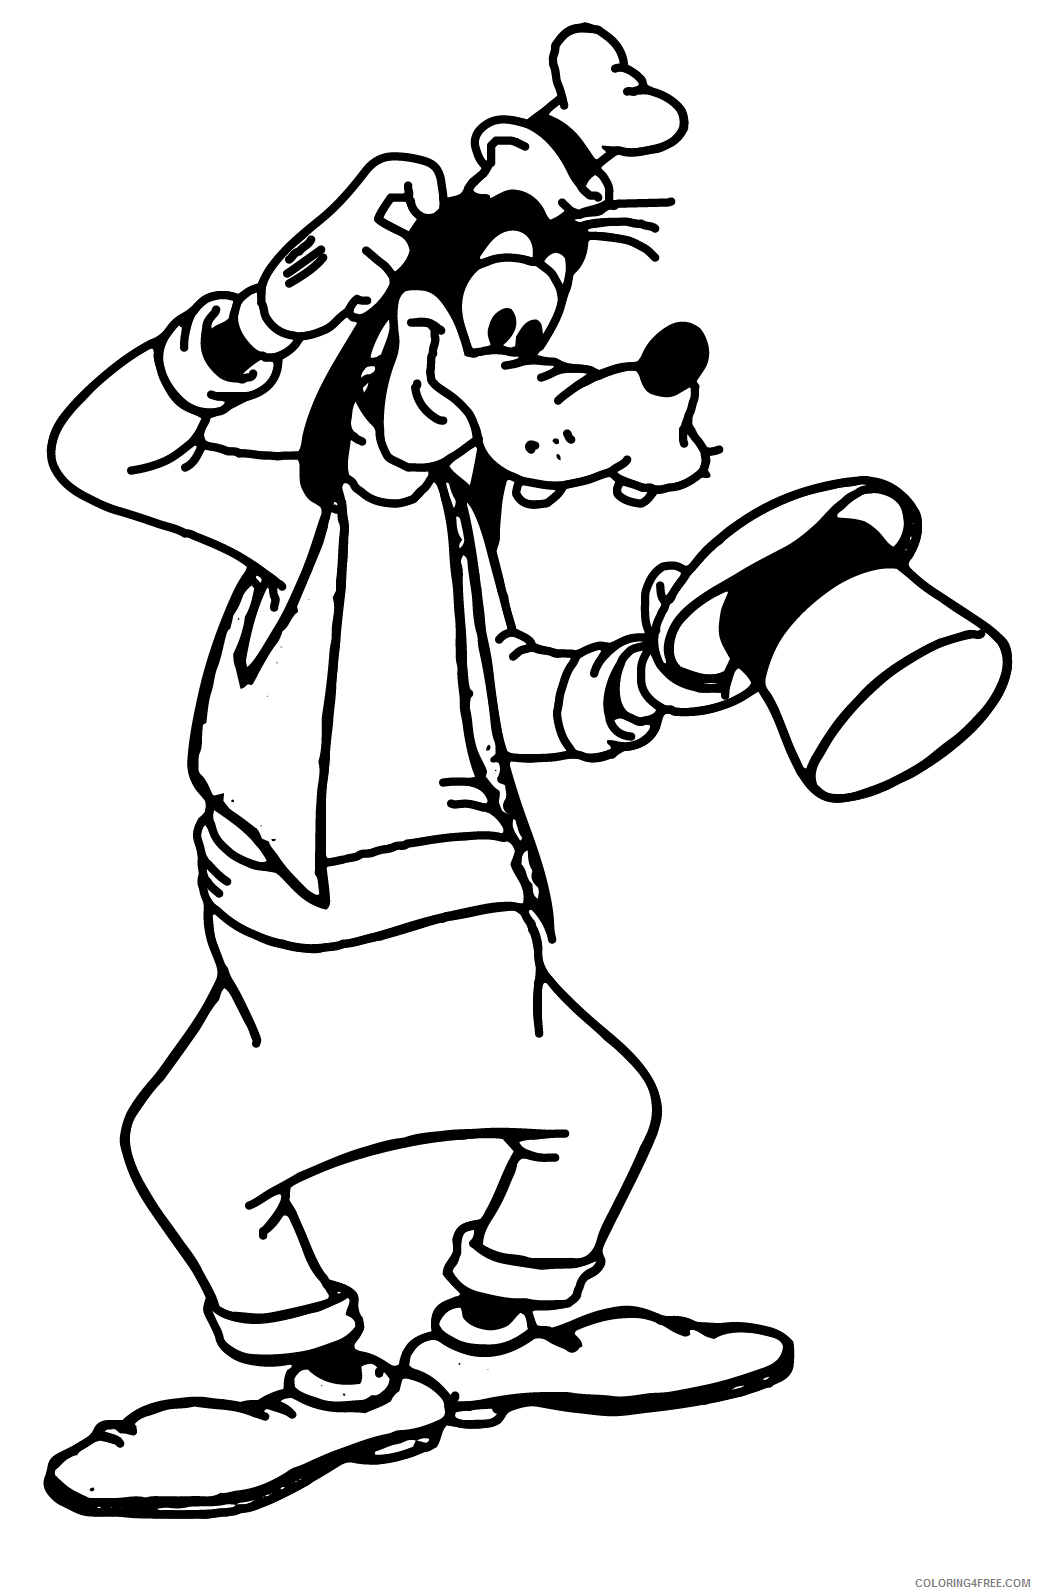 Goofy Coloring Pages Cartoons Goofy to Print for Free Printable 2020 3035 Coloring4free